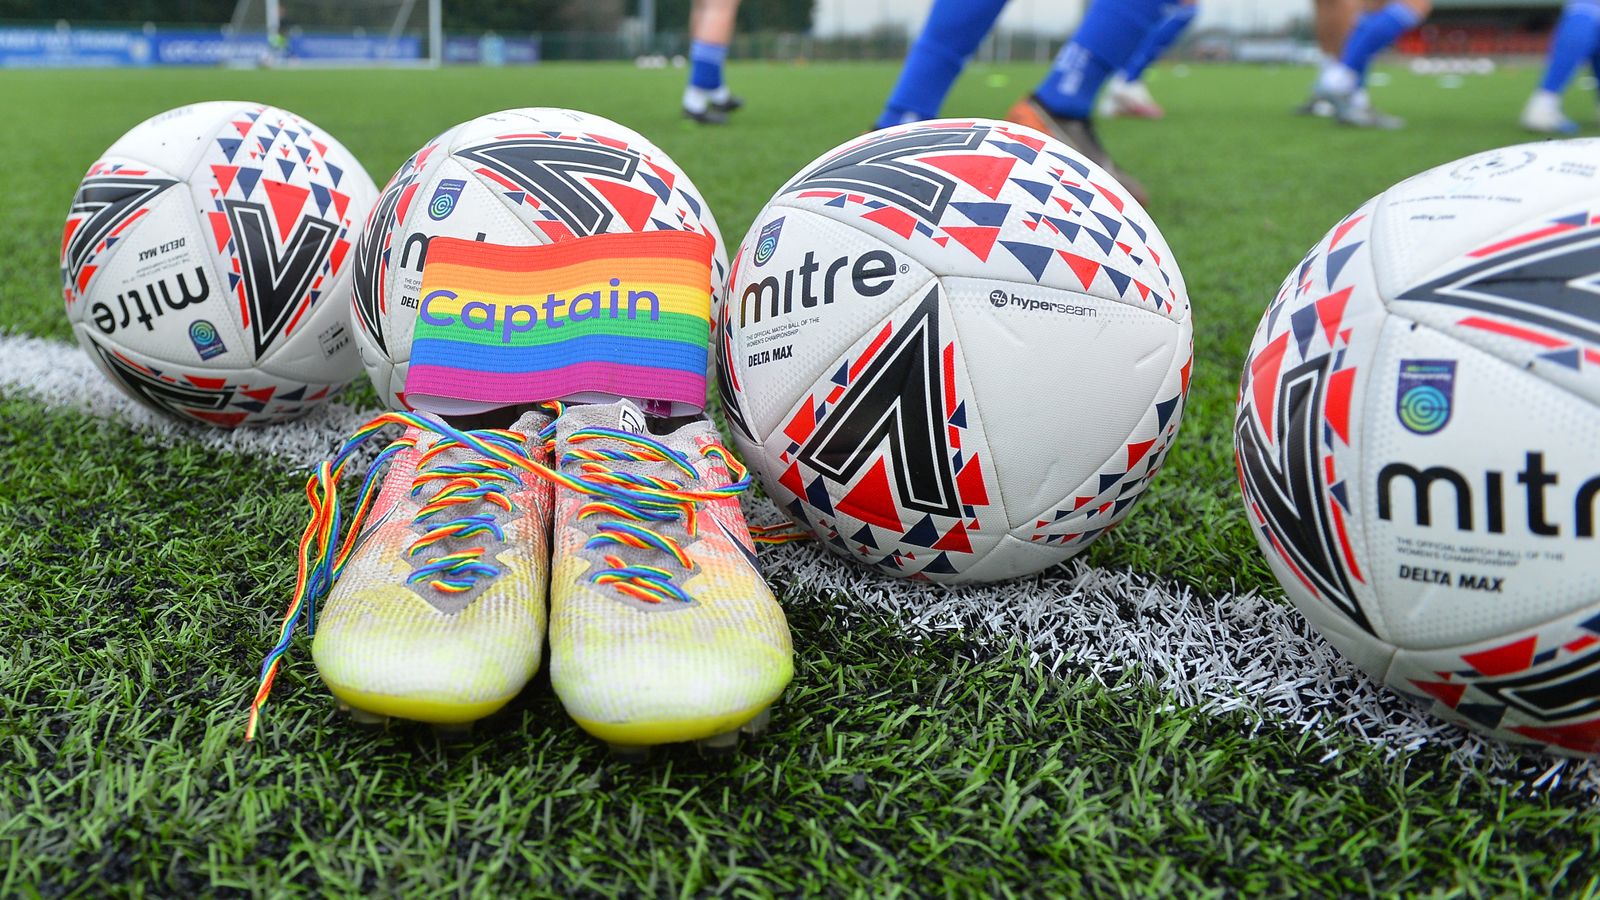 rainbow-laces-stonewall-reveals-stats-that-show-fantastic-progress-in-fight-for-lgbtq-inclusion-in-sport